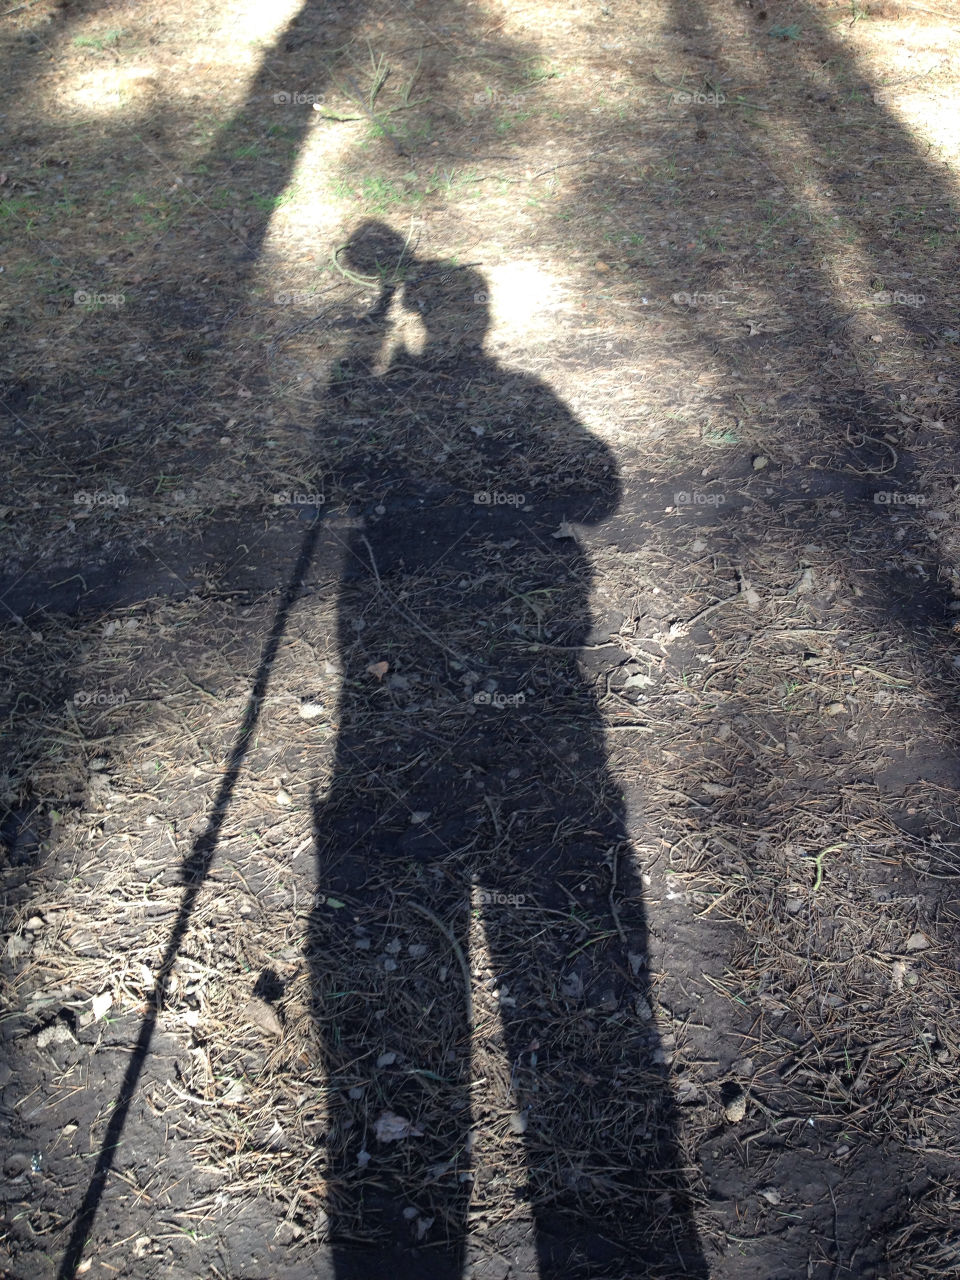 Silhouette of photographer